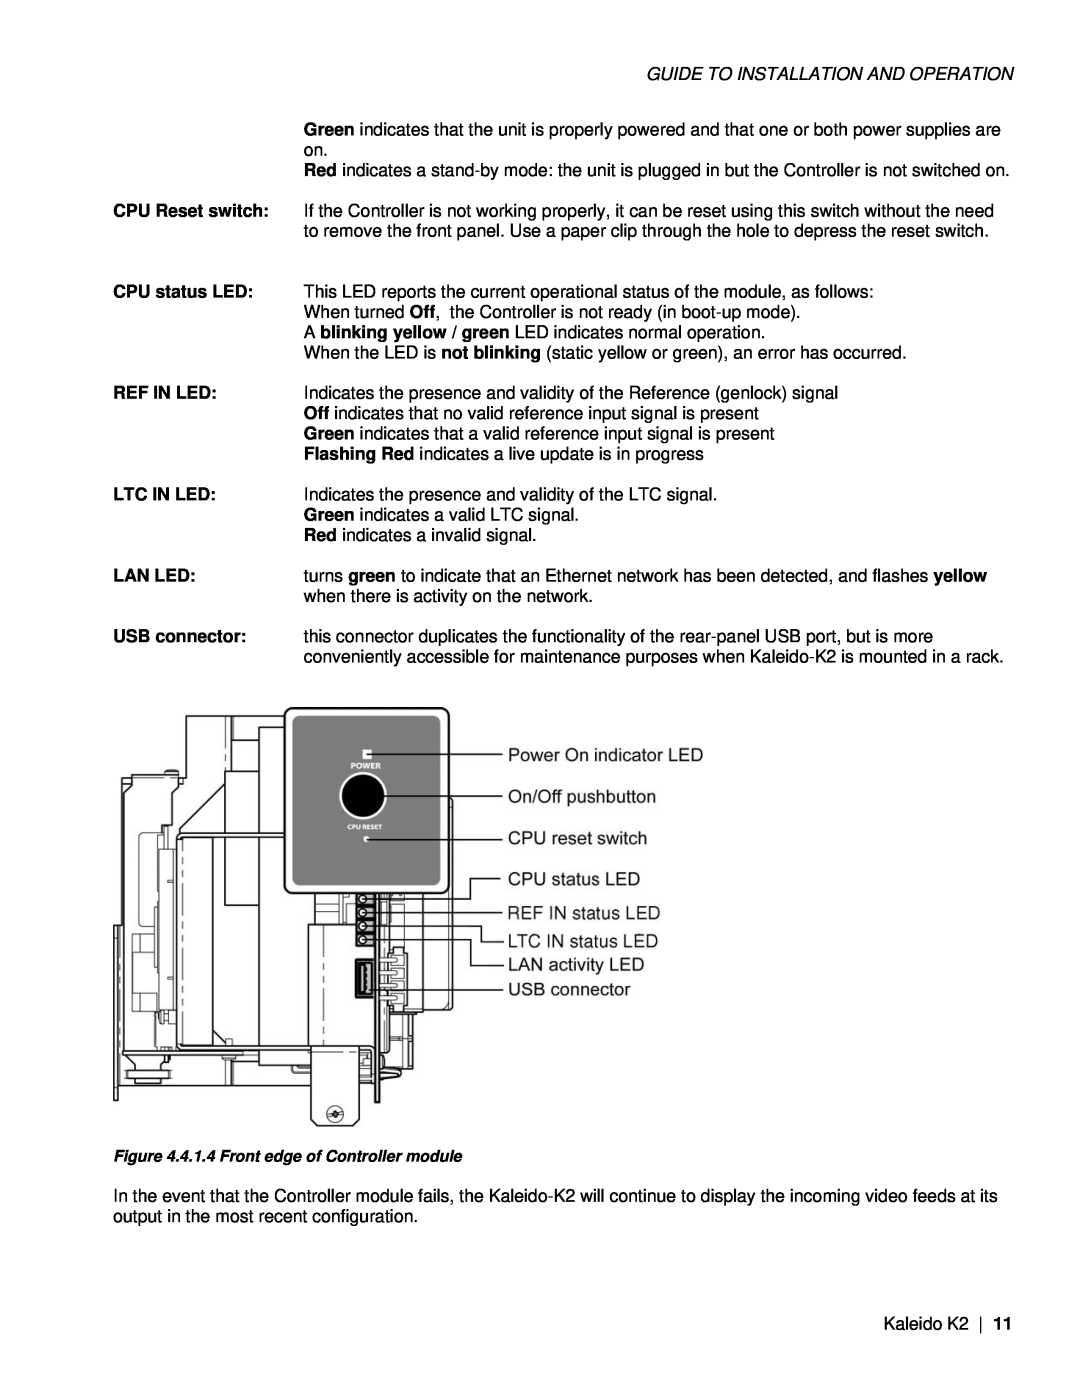 Miranda Camera Co KALEIDO-K2, M406-9900-402 Guide To Installation And Operation, 4.1.4 Front edge of Controller module 